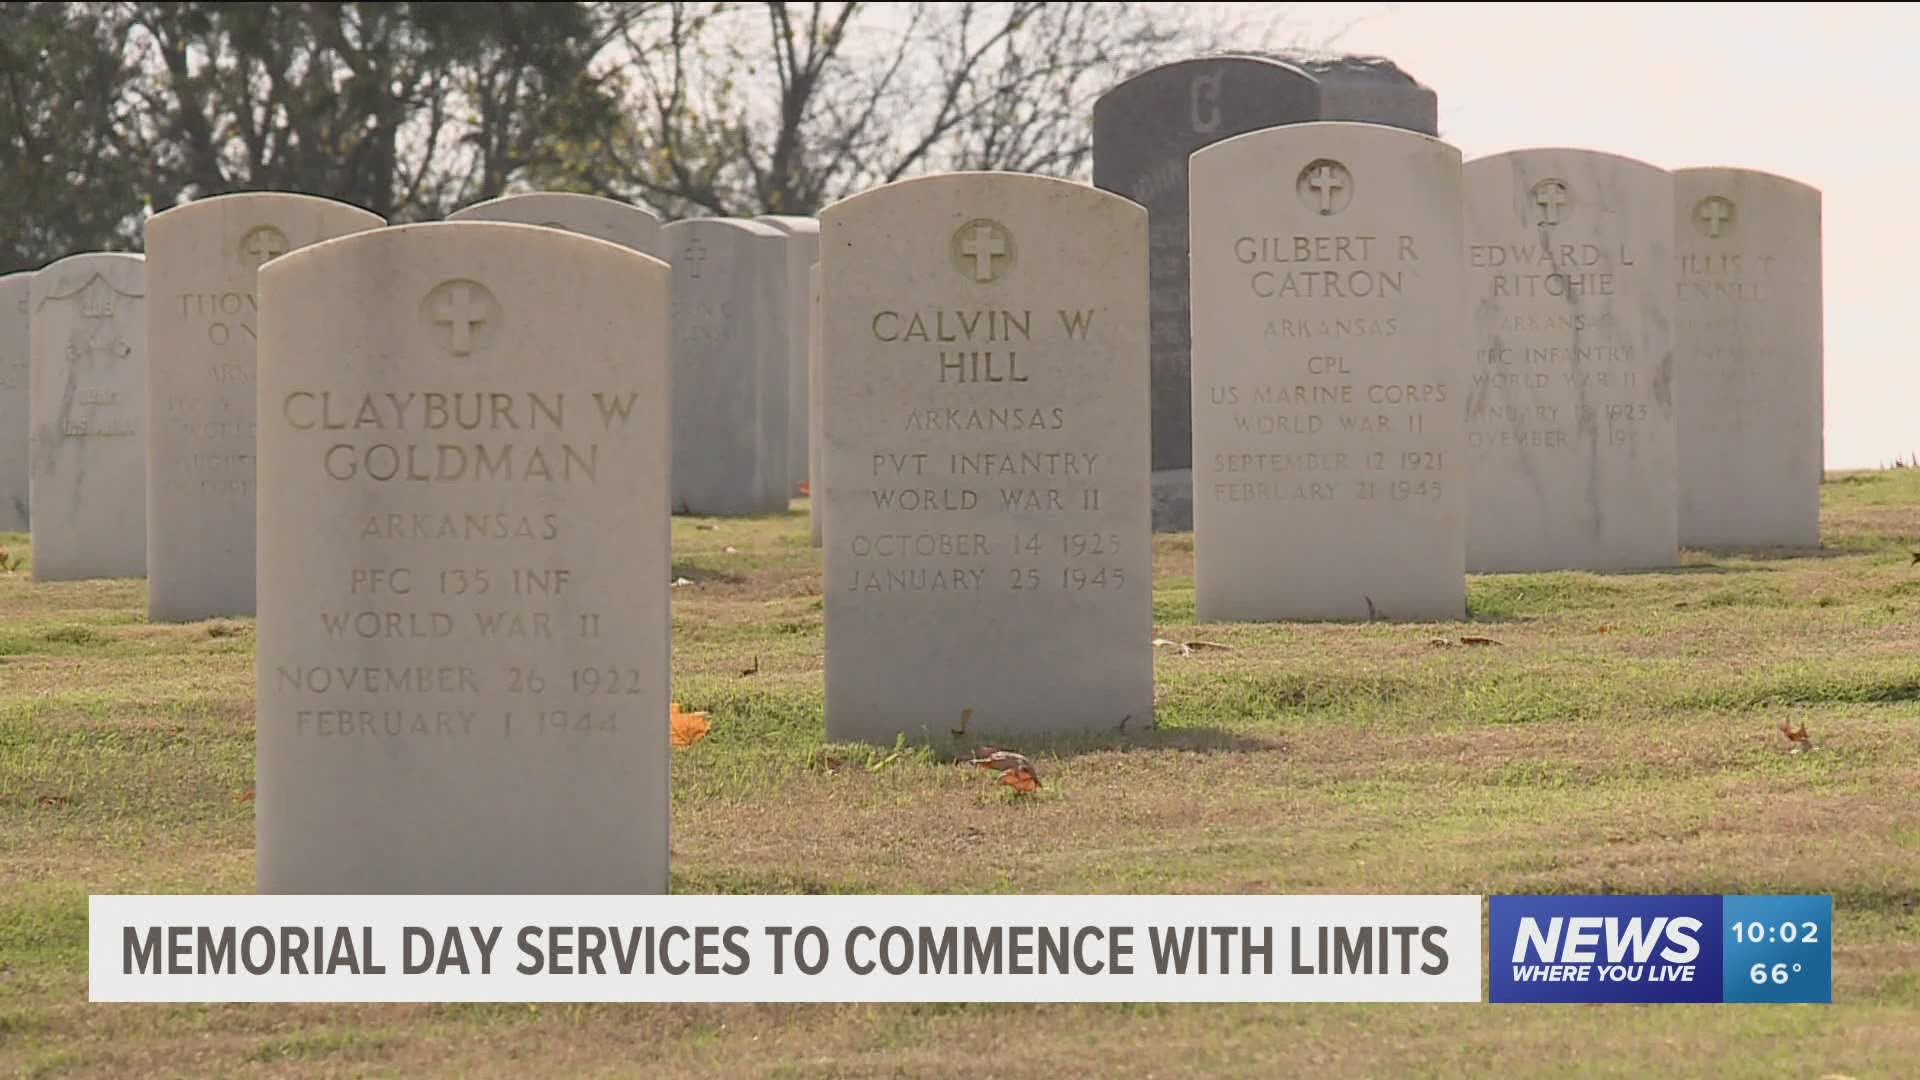 America's national cemeteries will honor Memorial Day in a different way this year amid the coronavirus pandemic.